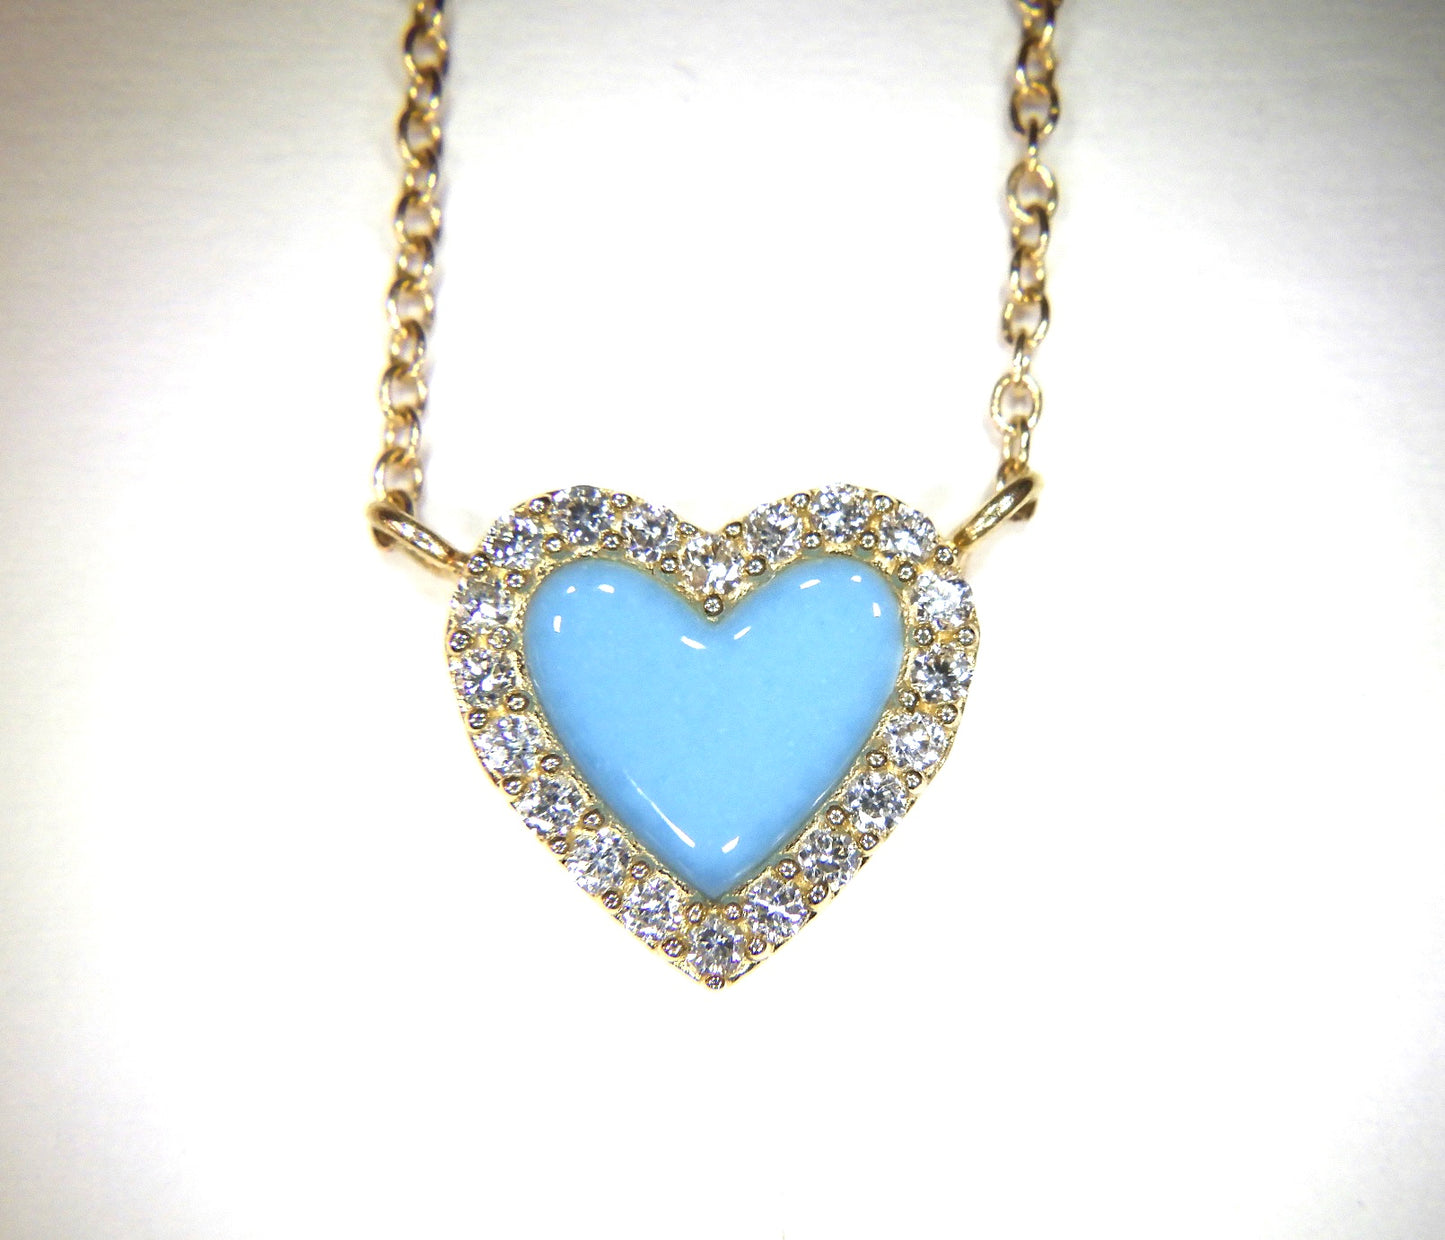 14k YG turquoise and diamond small heart necklace